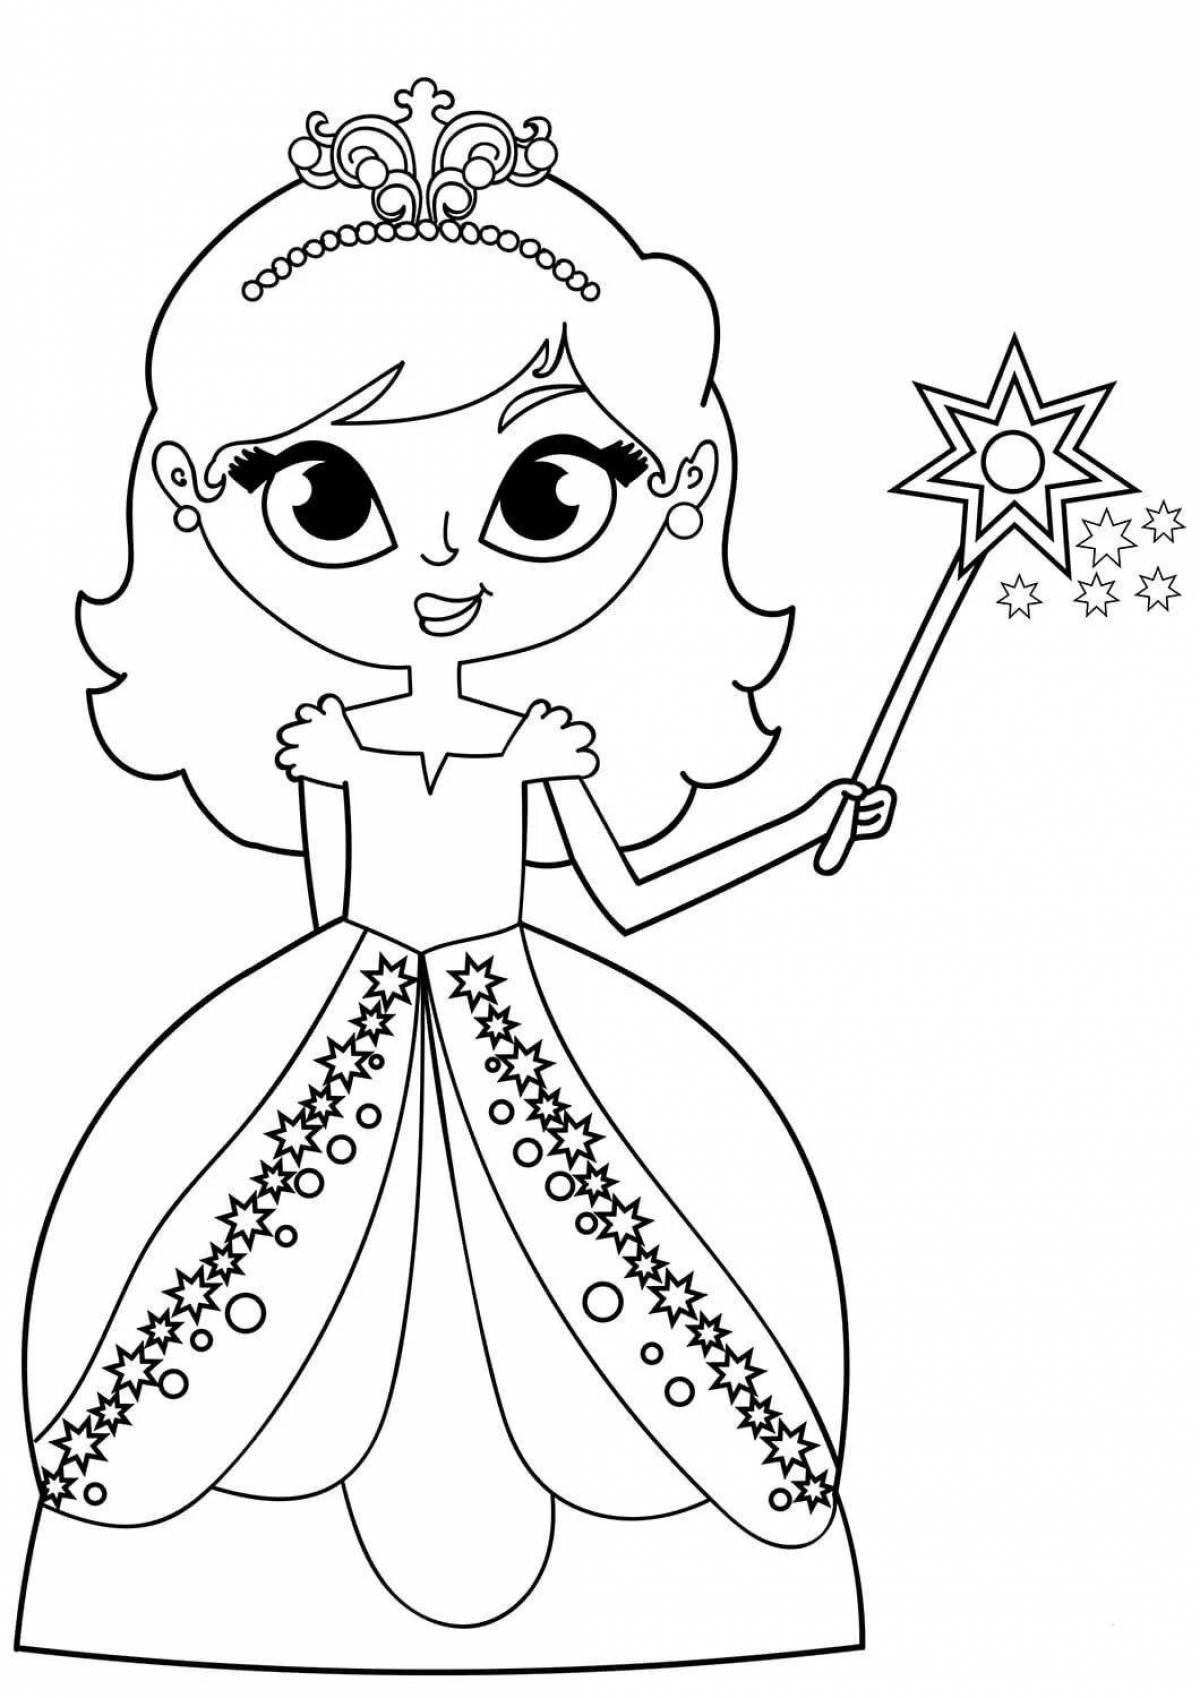 Amazing coloring book for 3 year old girls, princess